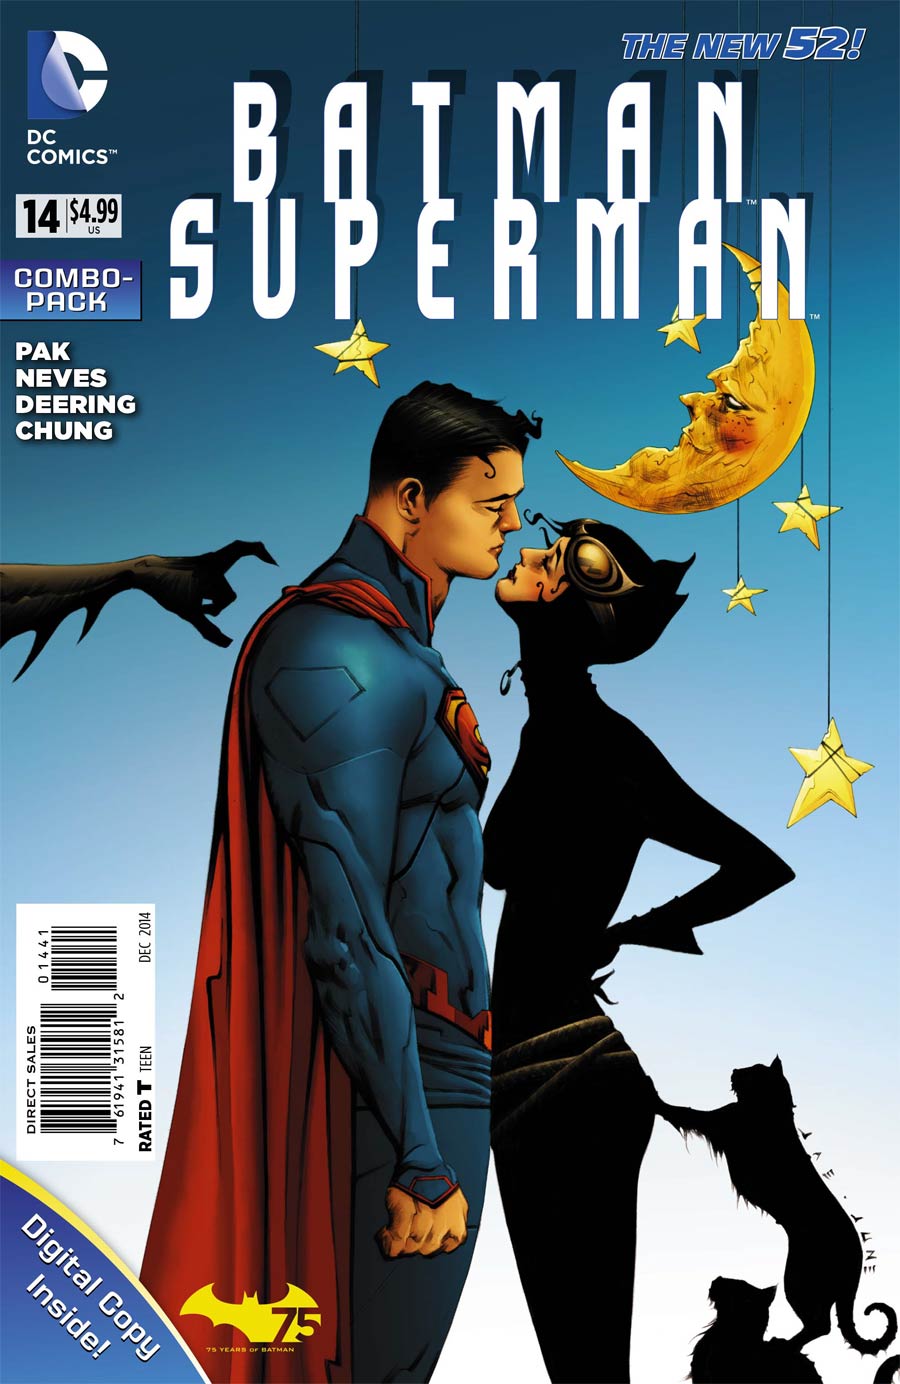 Batman Superman #14 Cover C Combo Pack With Polybag